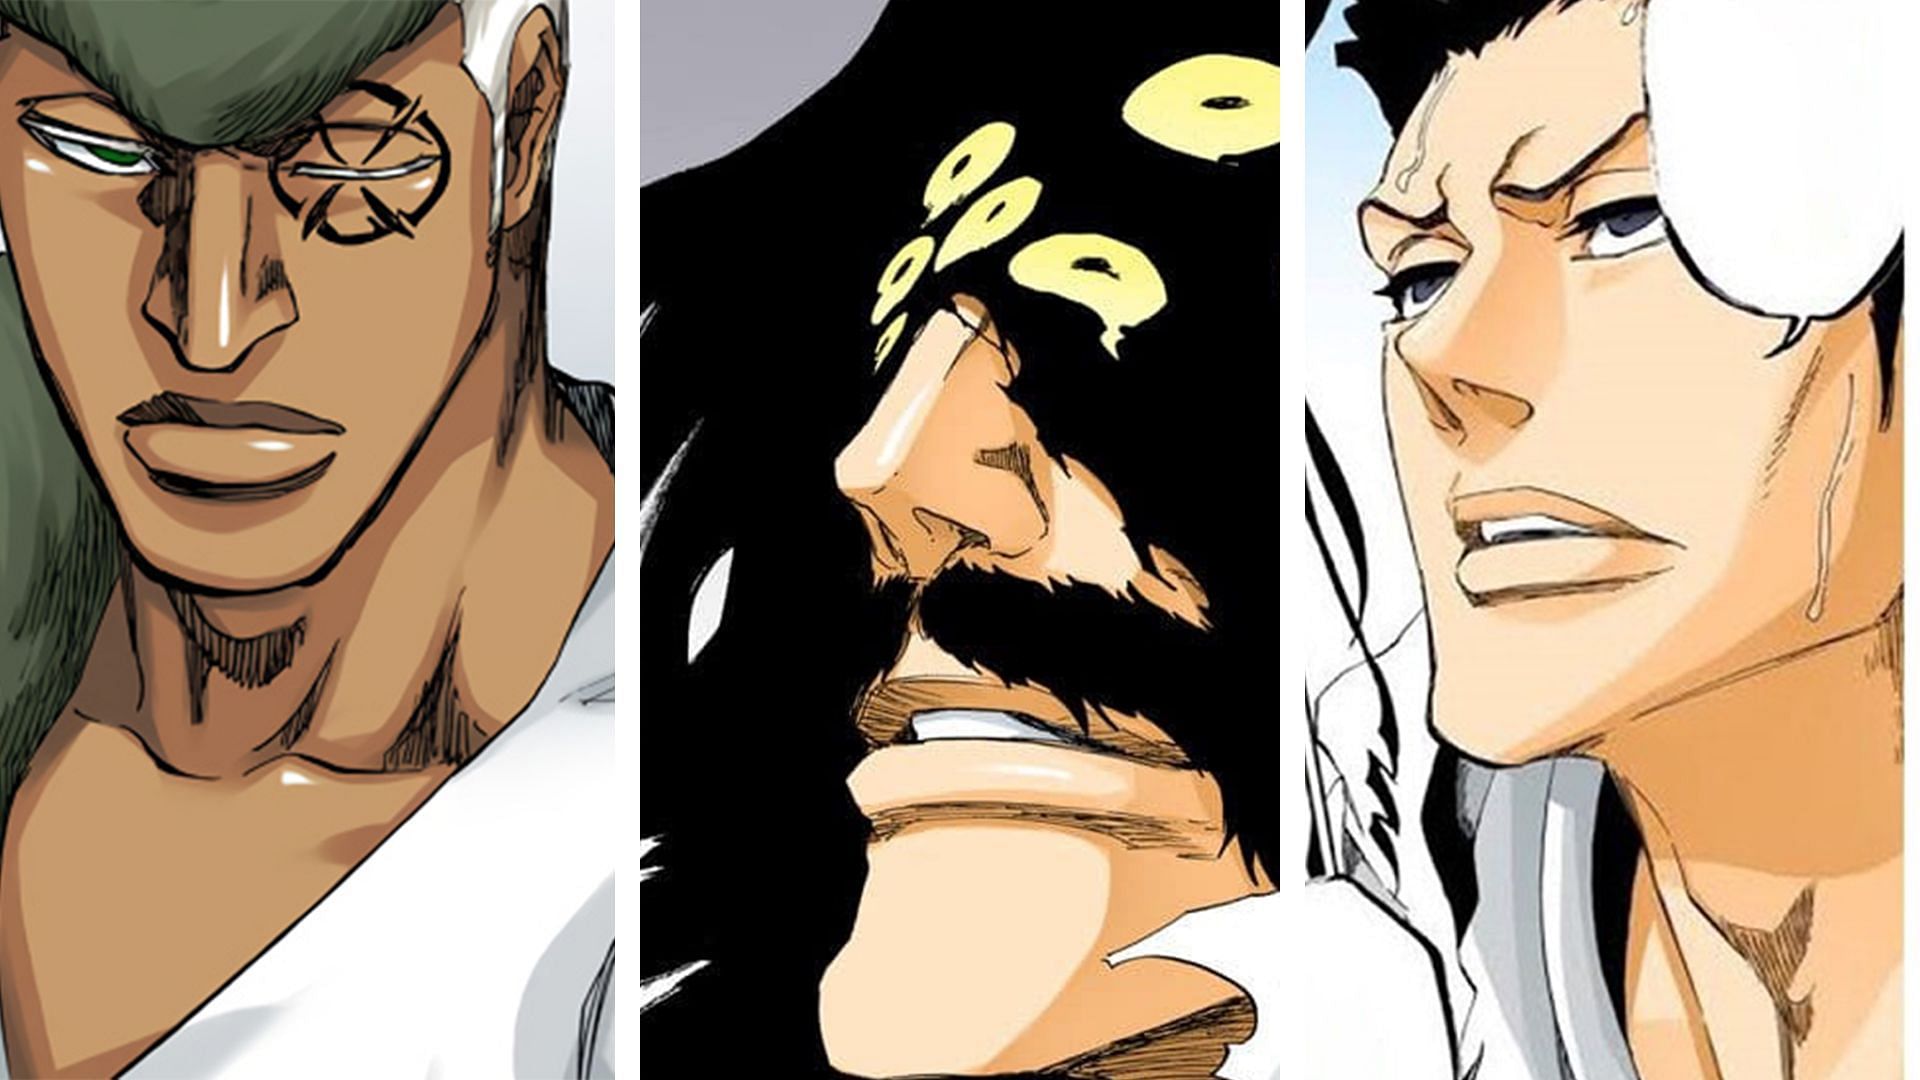 Bleach: Thousand-Year Blood War Unleashes the Quincy's Most Powerful Form